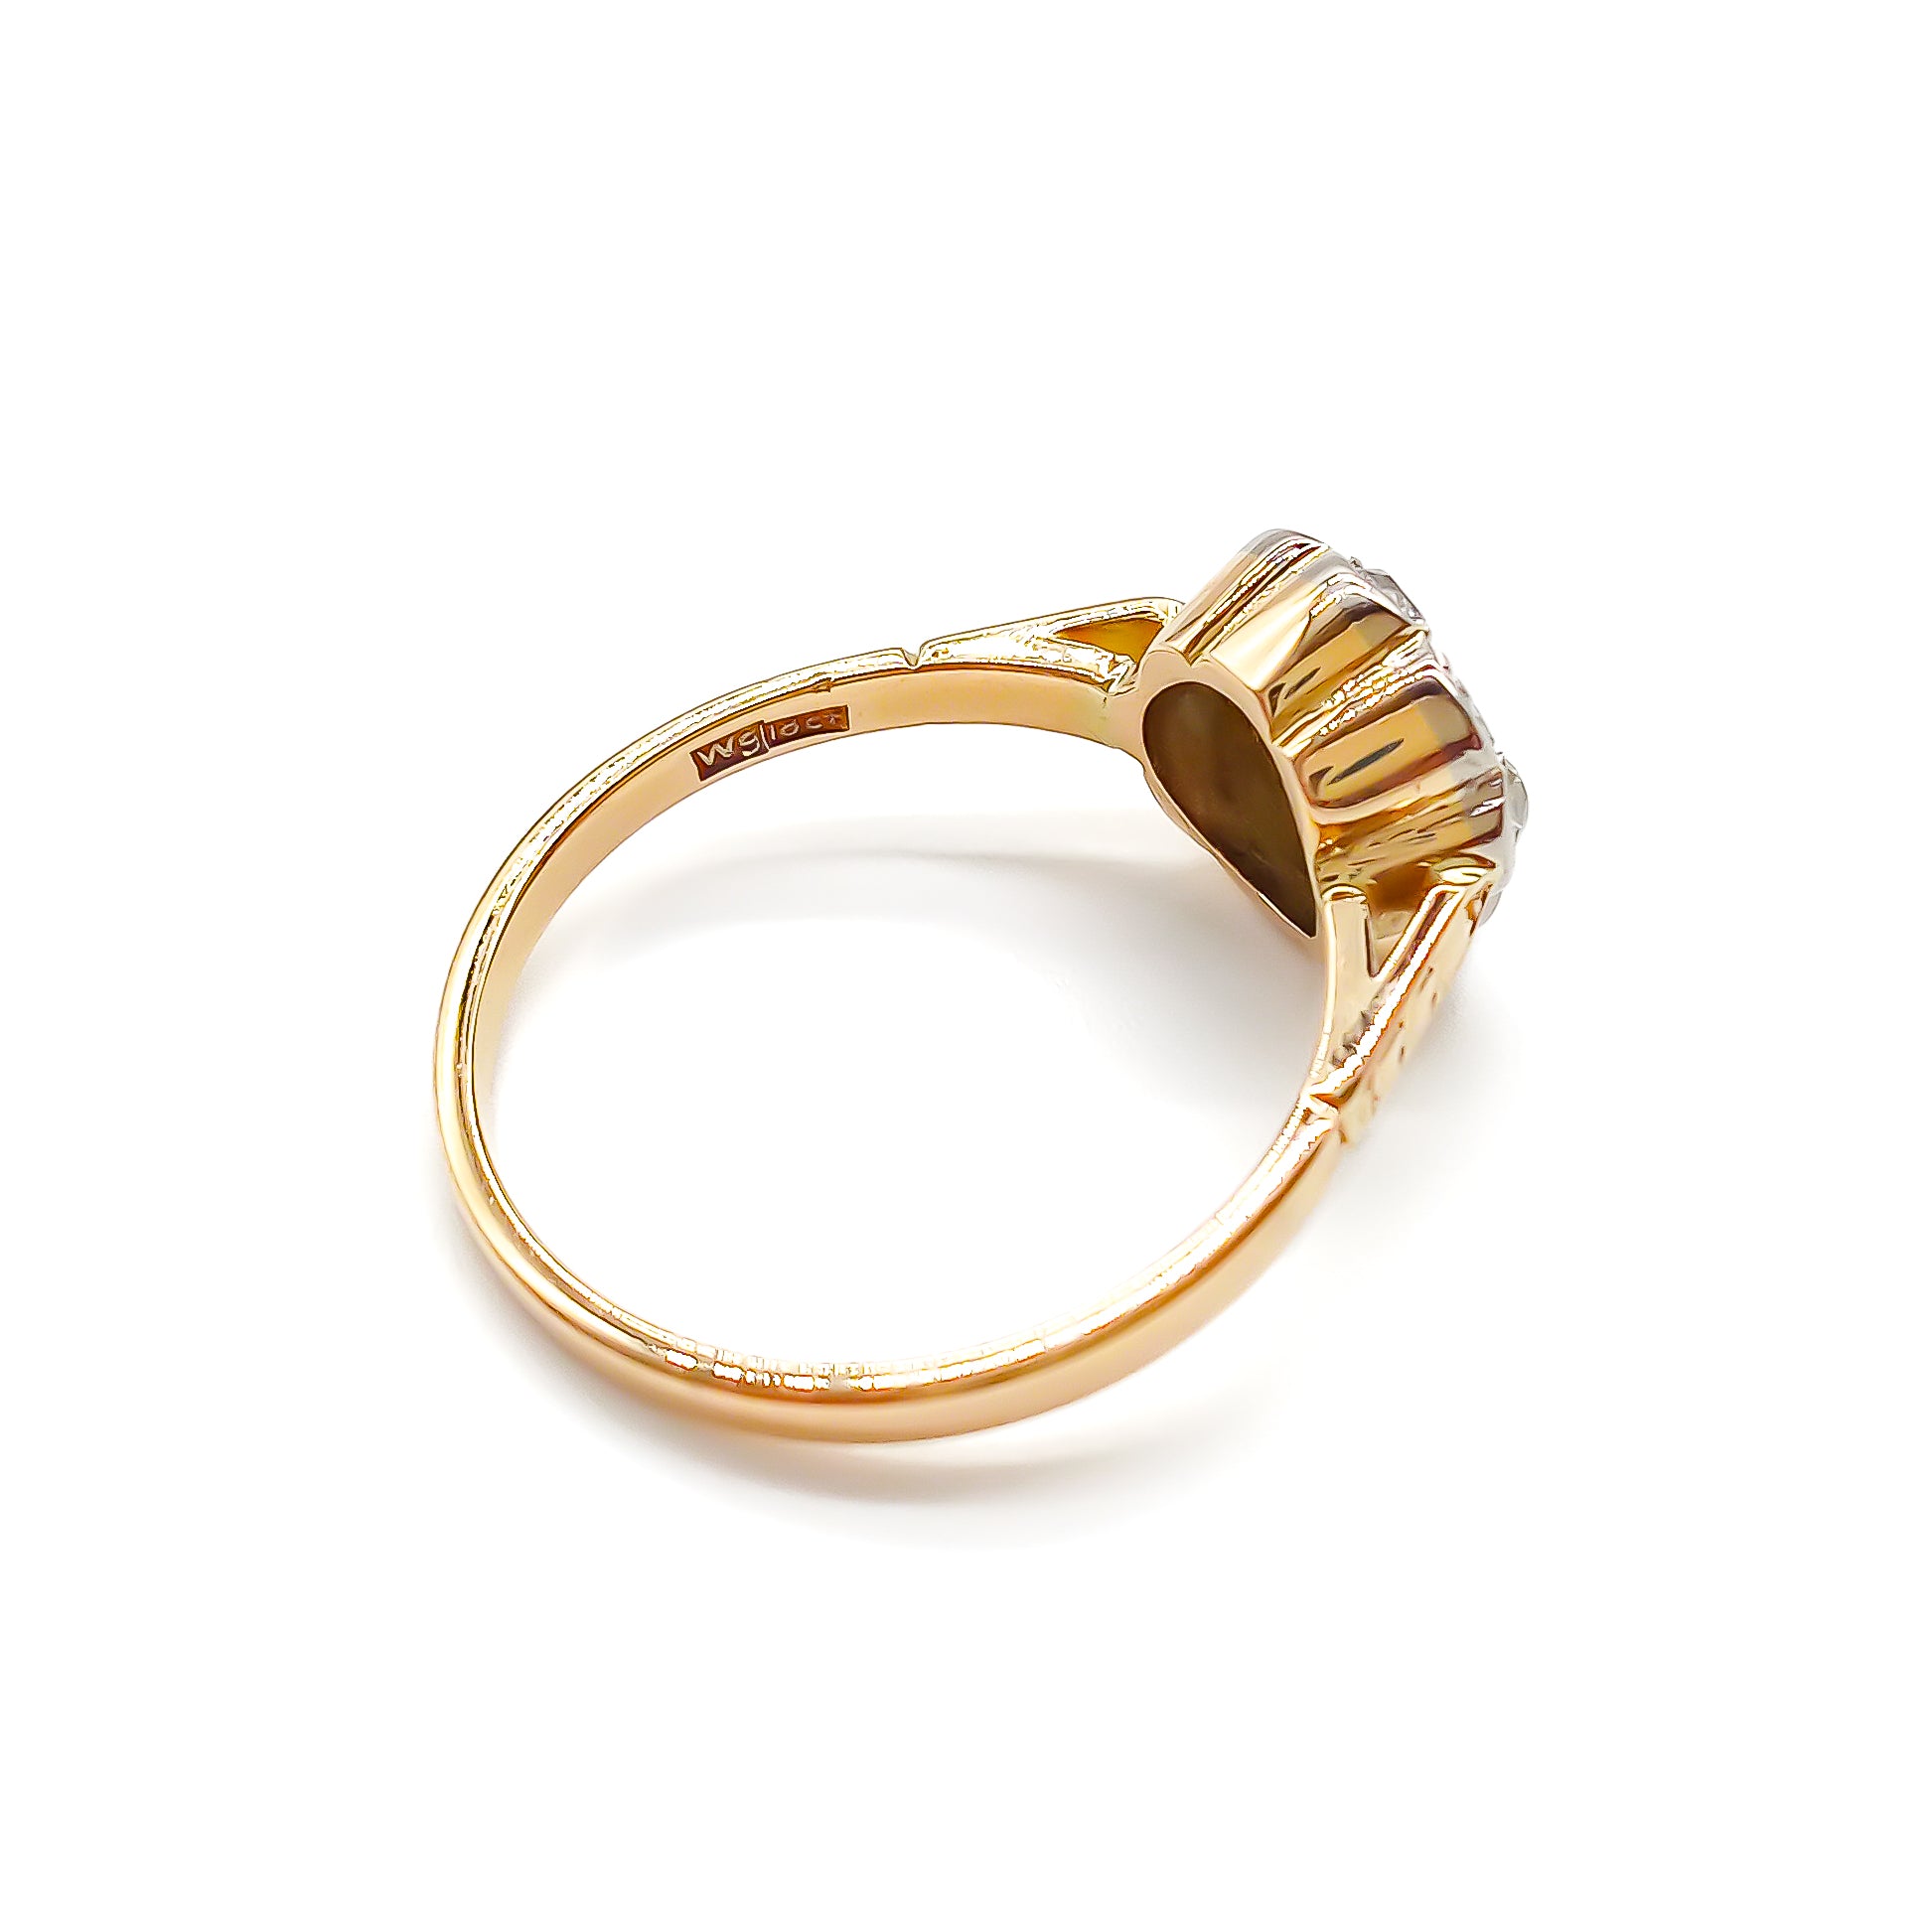  Dainty 18ct gold ring with five old-cut diamonds set in the shape of a flower. 